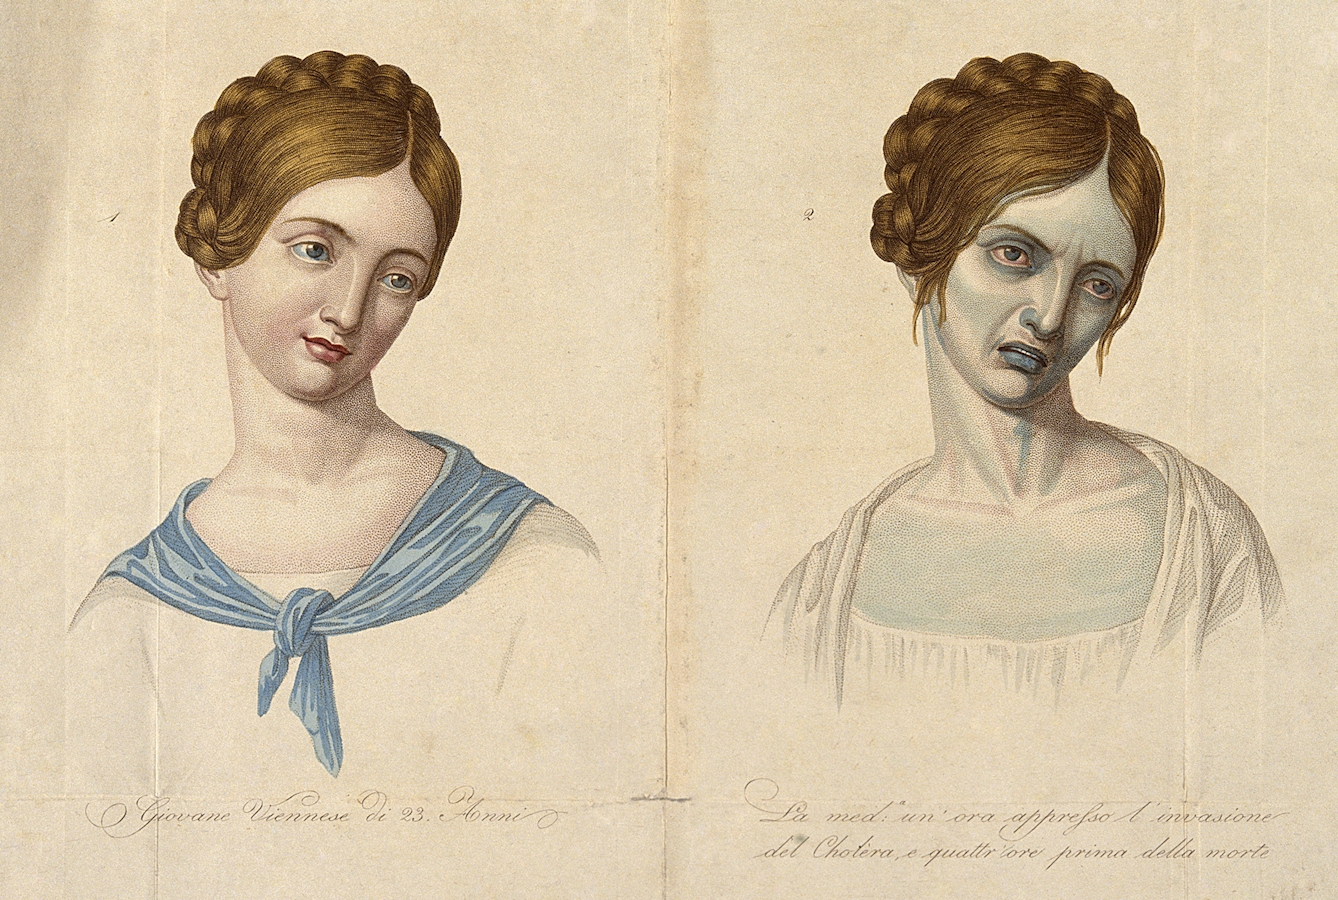 V0010485 A young Viennese woman, aged 23, depicted before and after